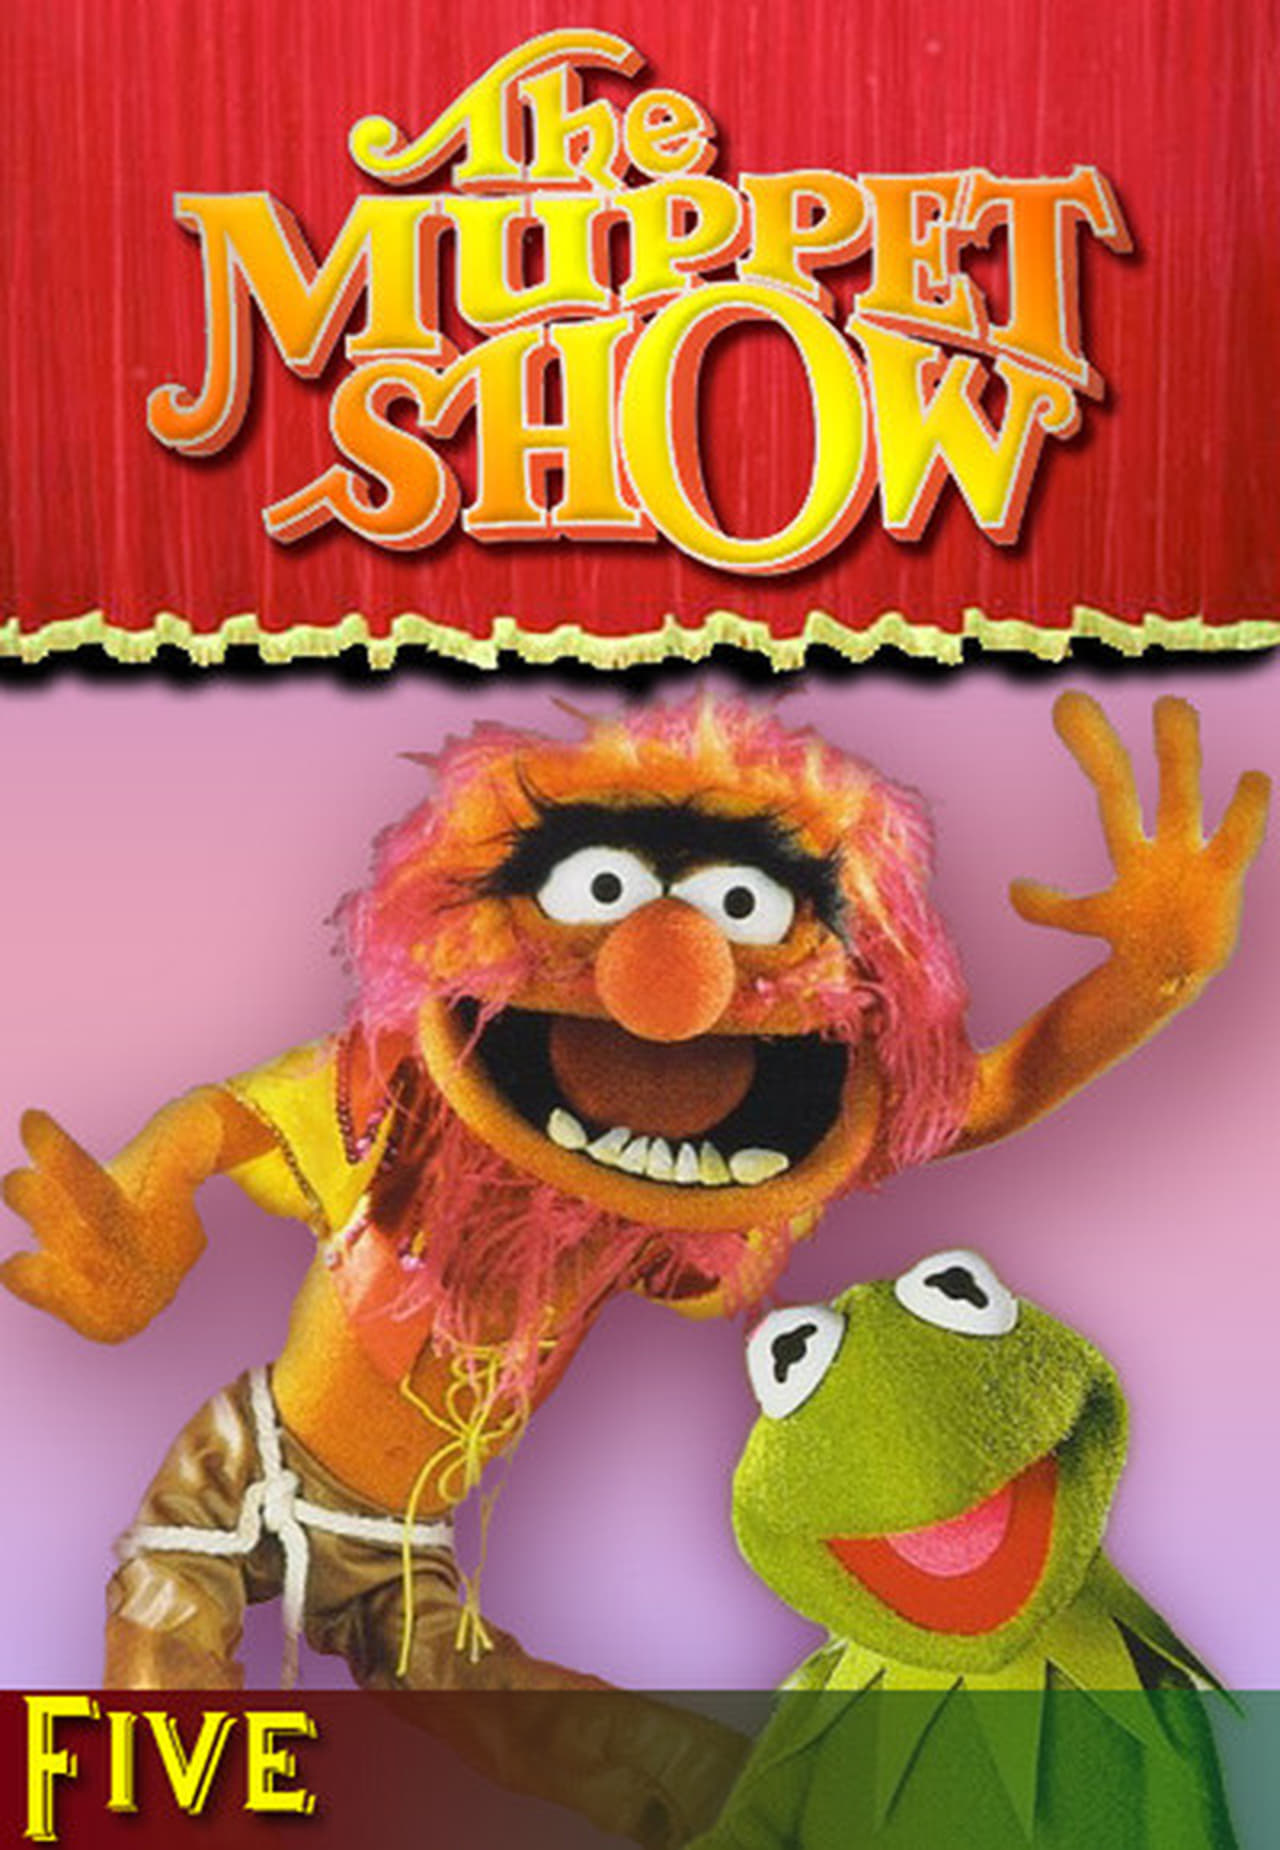 The Muppet Show (1980)